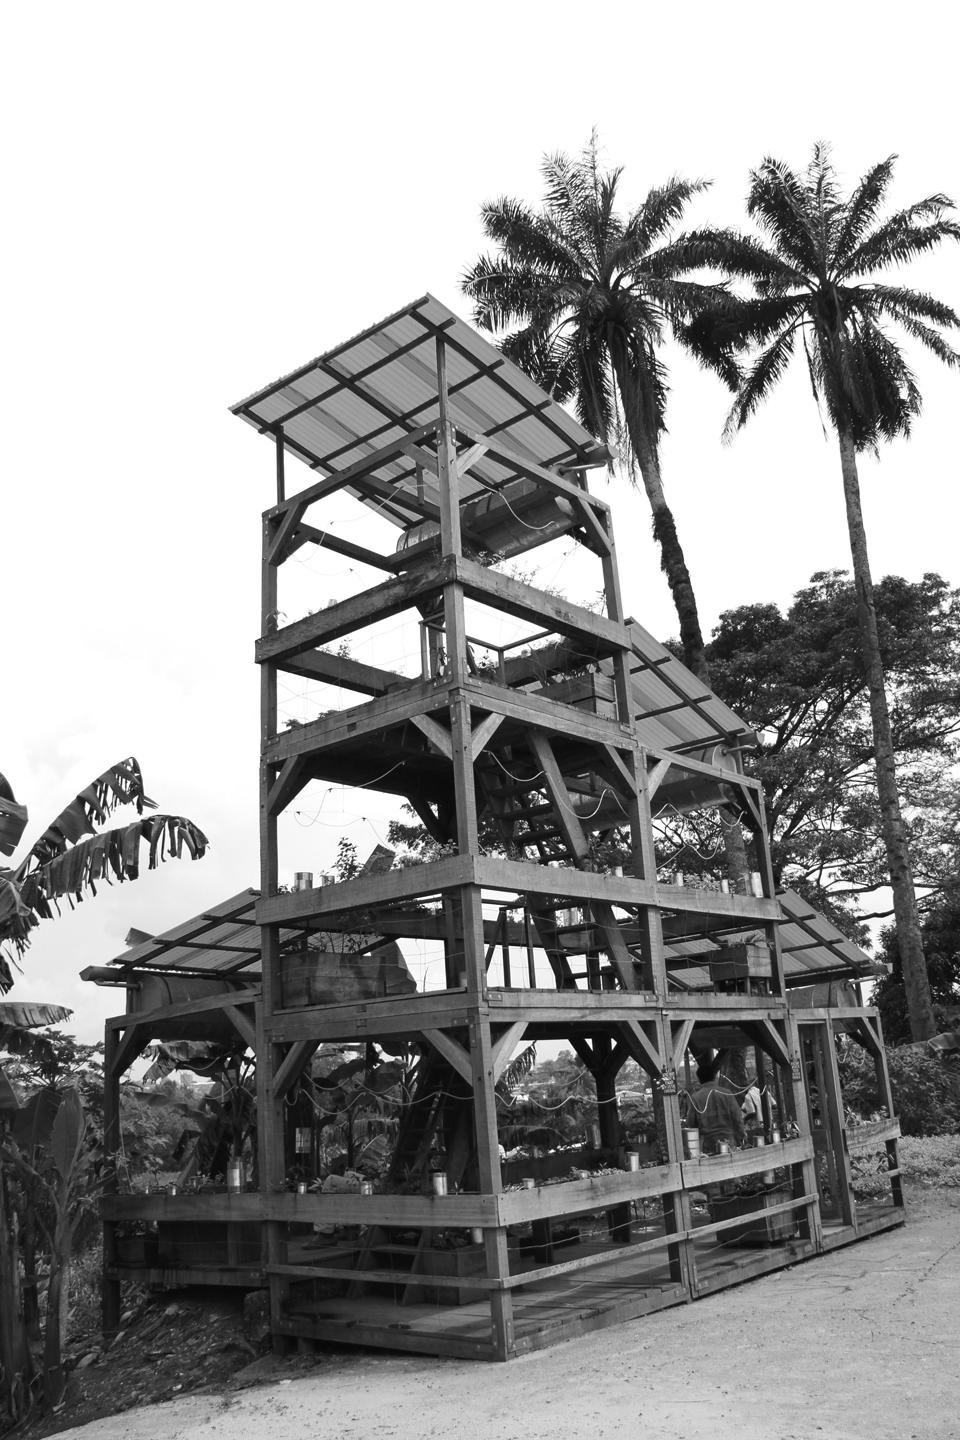 Lucas Grandin, <em>Le jardin sonore</em>, Bonamouti-Deïdo, Douala, 2010. Public art commissioned and produced by doual'art within SUD 2010. Photo by Roberto Paci Dalò, Douala, 2010